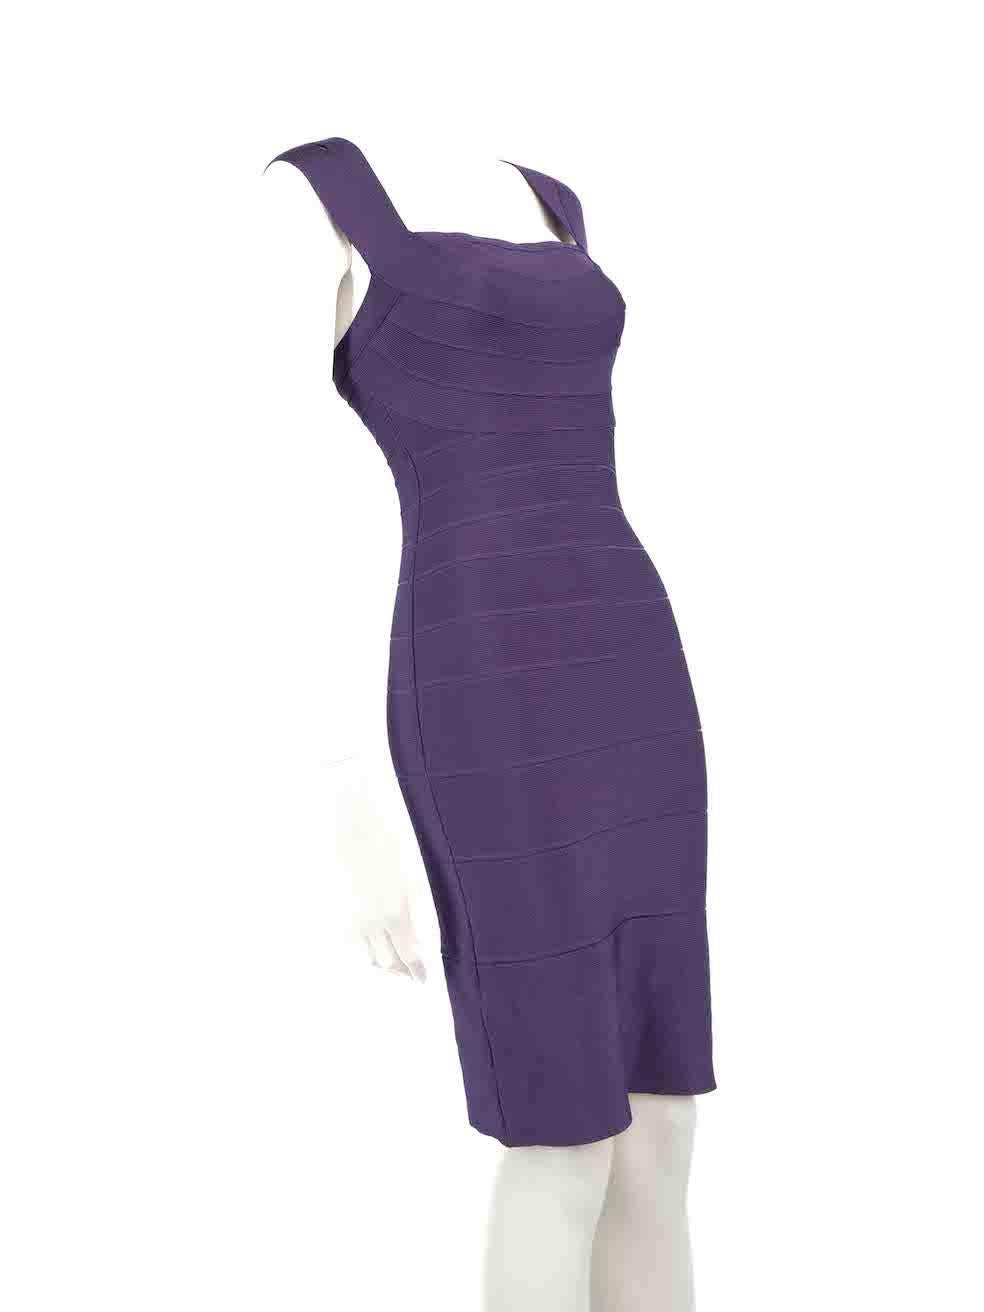 CONDITION is Very good. Minimal wear to dress is evident. Minimal wear to the fabric composition with a couple of hardly visible pulls to the threads on this used Herve Leger designer resale item.
 
 
 
 Details
 
 
 Purple
 
 Rayon
 
 Dress
 
